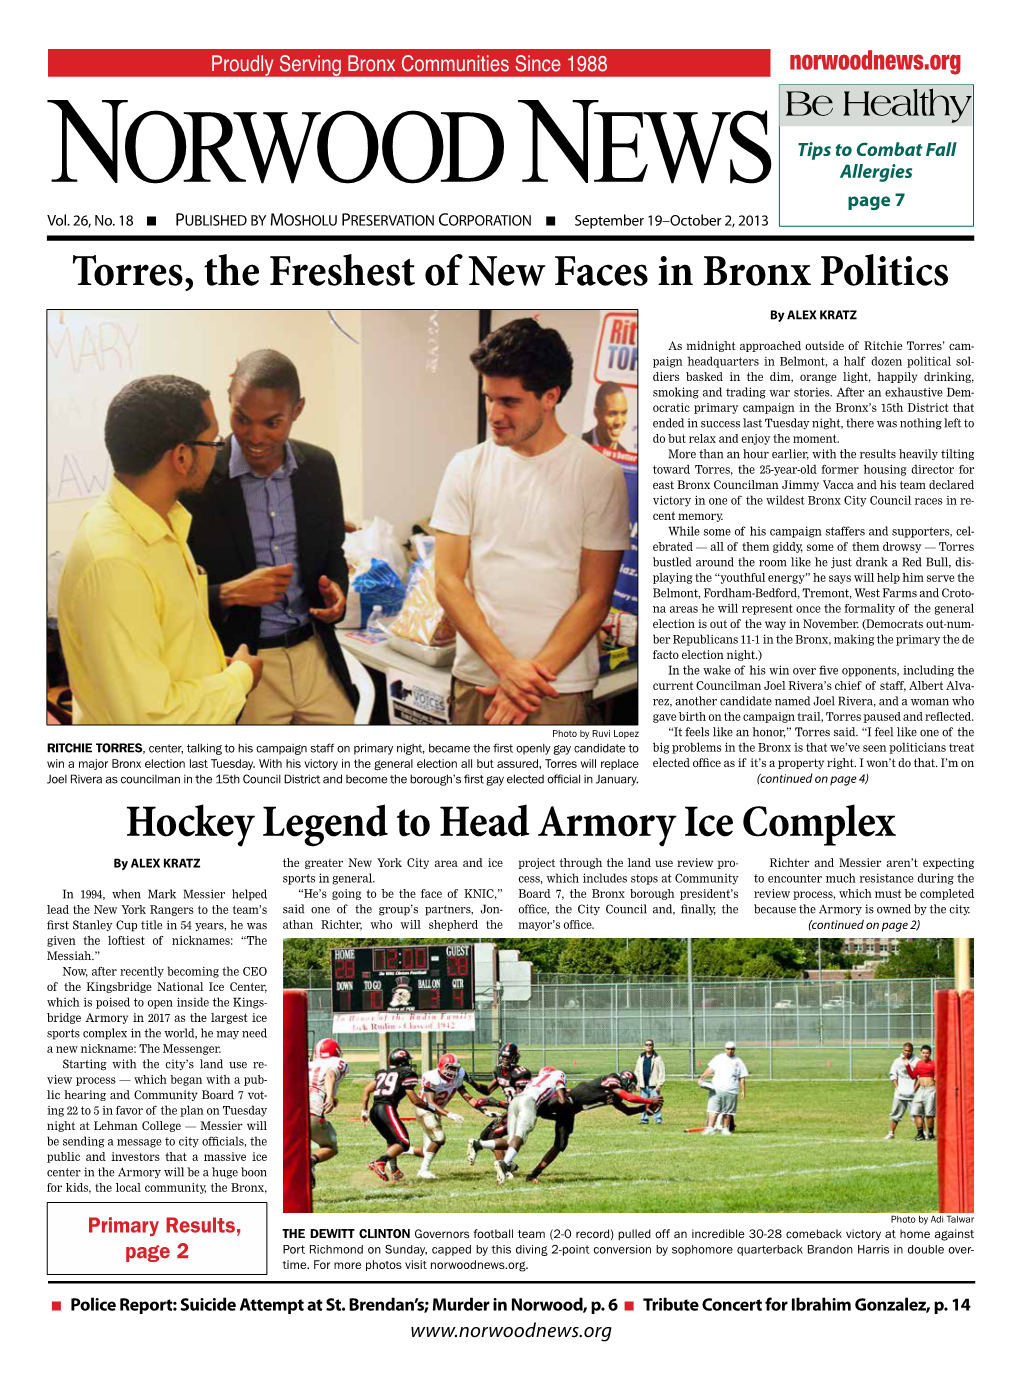 Torres, the Freshest of New Faces in Bronx Politics Hockey Legend To